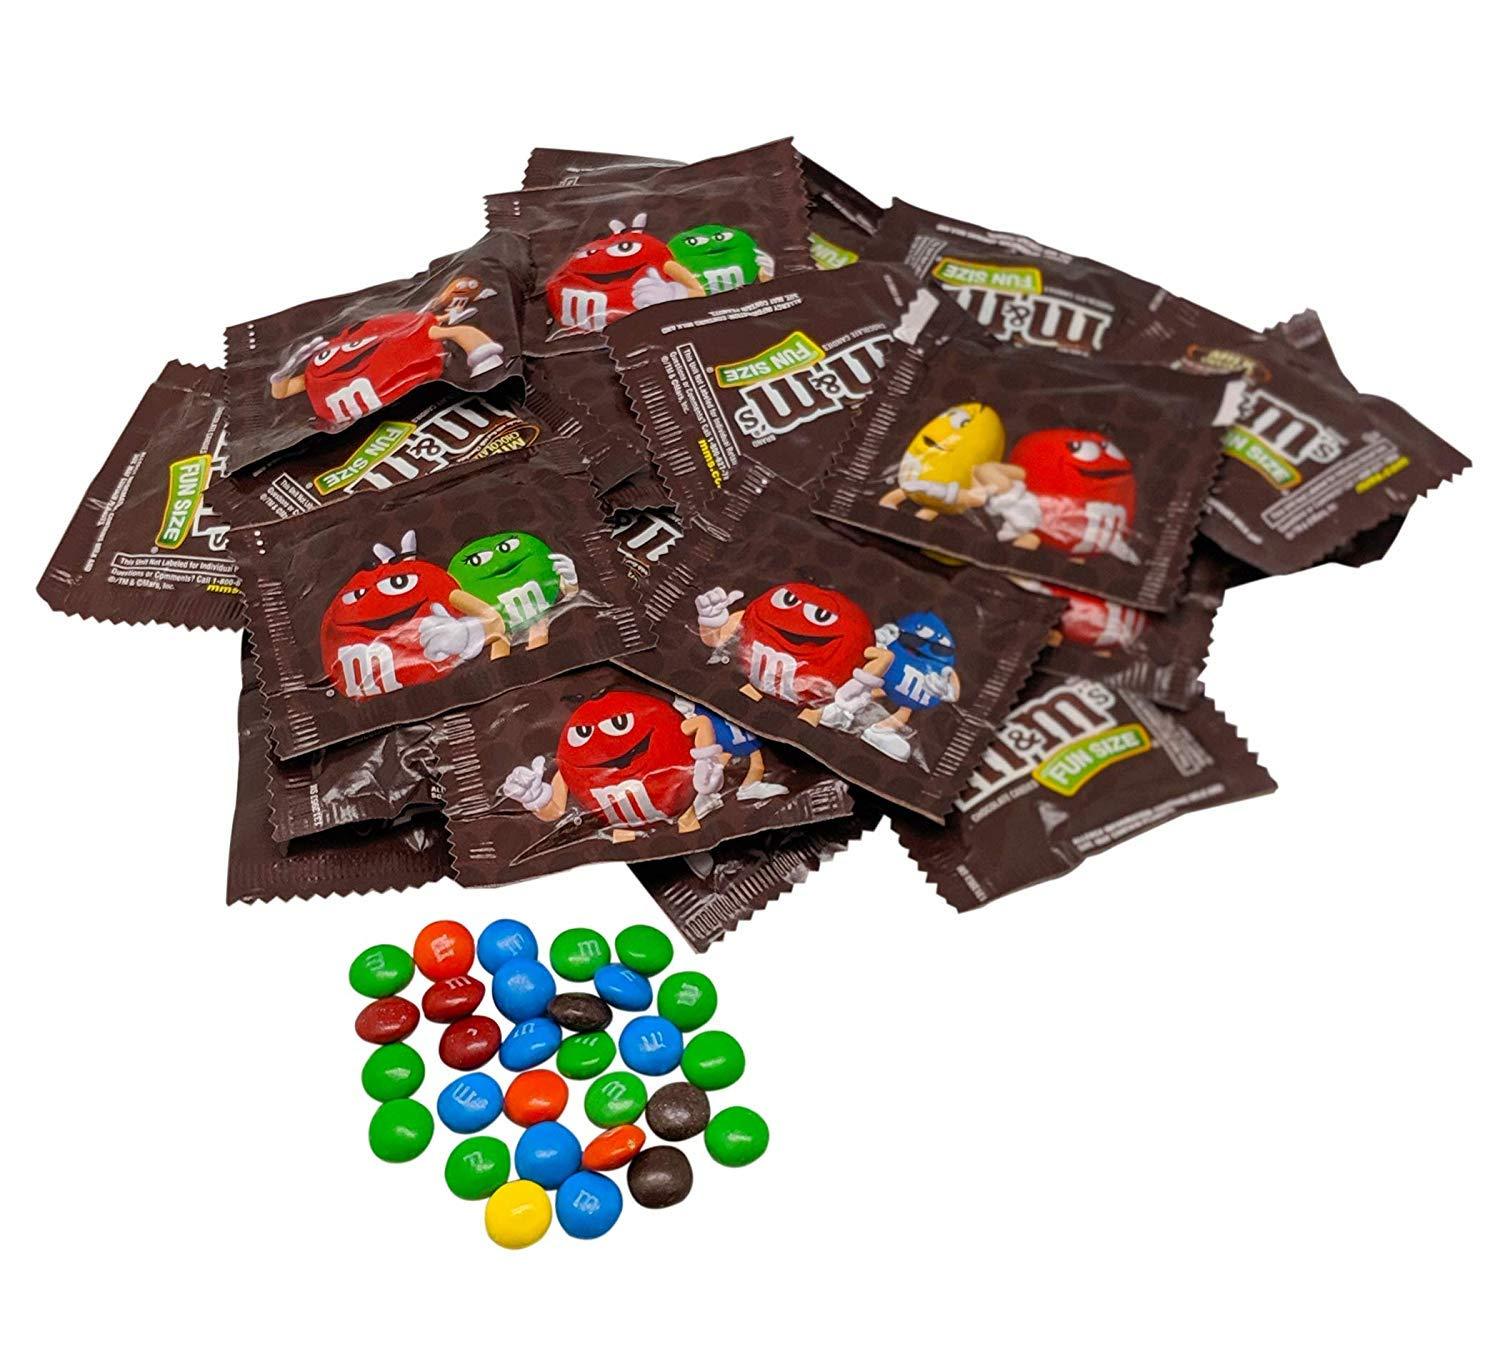 M&Ms Milk Chocolate Fun Size Candy - 1 LB (Approx. 32 Fun Size Packs) -  Comes in a Sealed/Resealable Bag - Perfect For Parties, Pinata, Office  Bowl, Wedding Favors, Easter Baskets 1 Pound (Pack of 1)